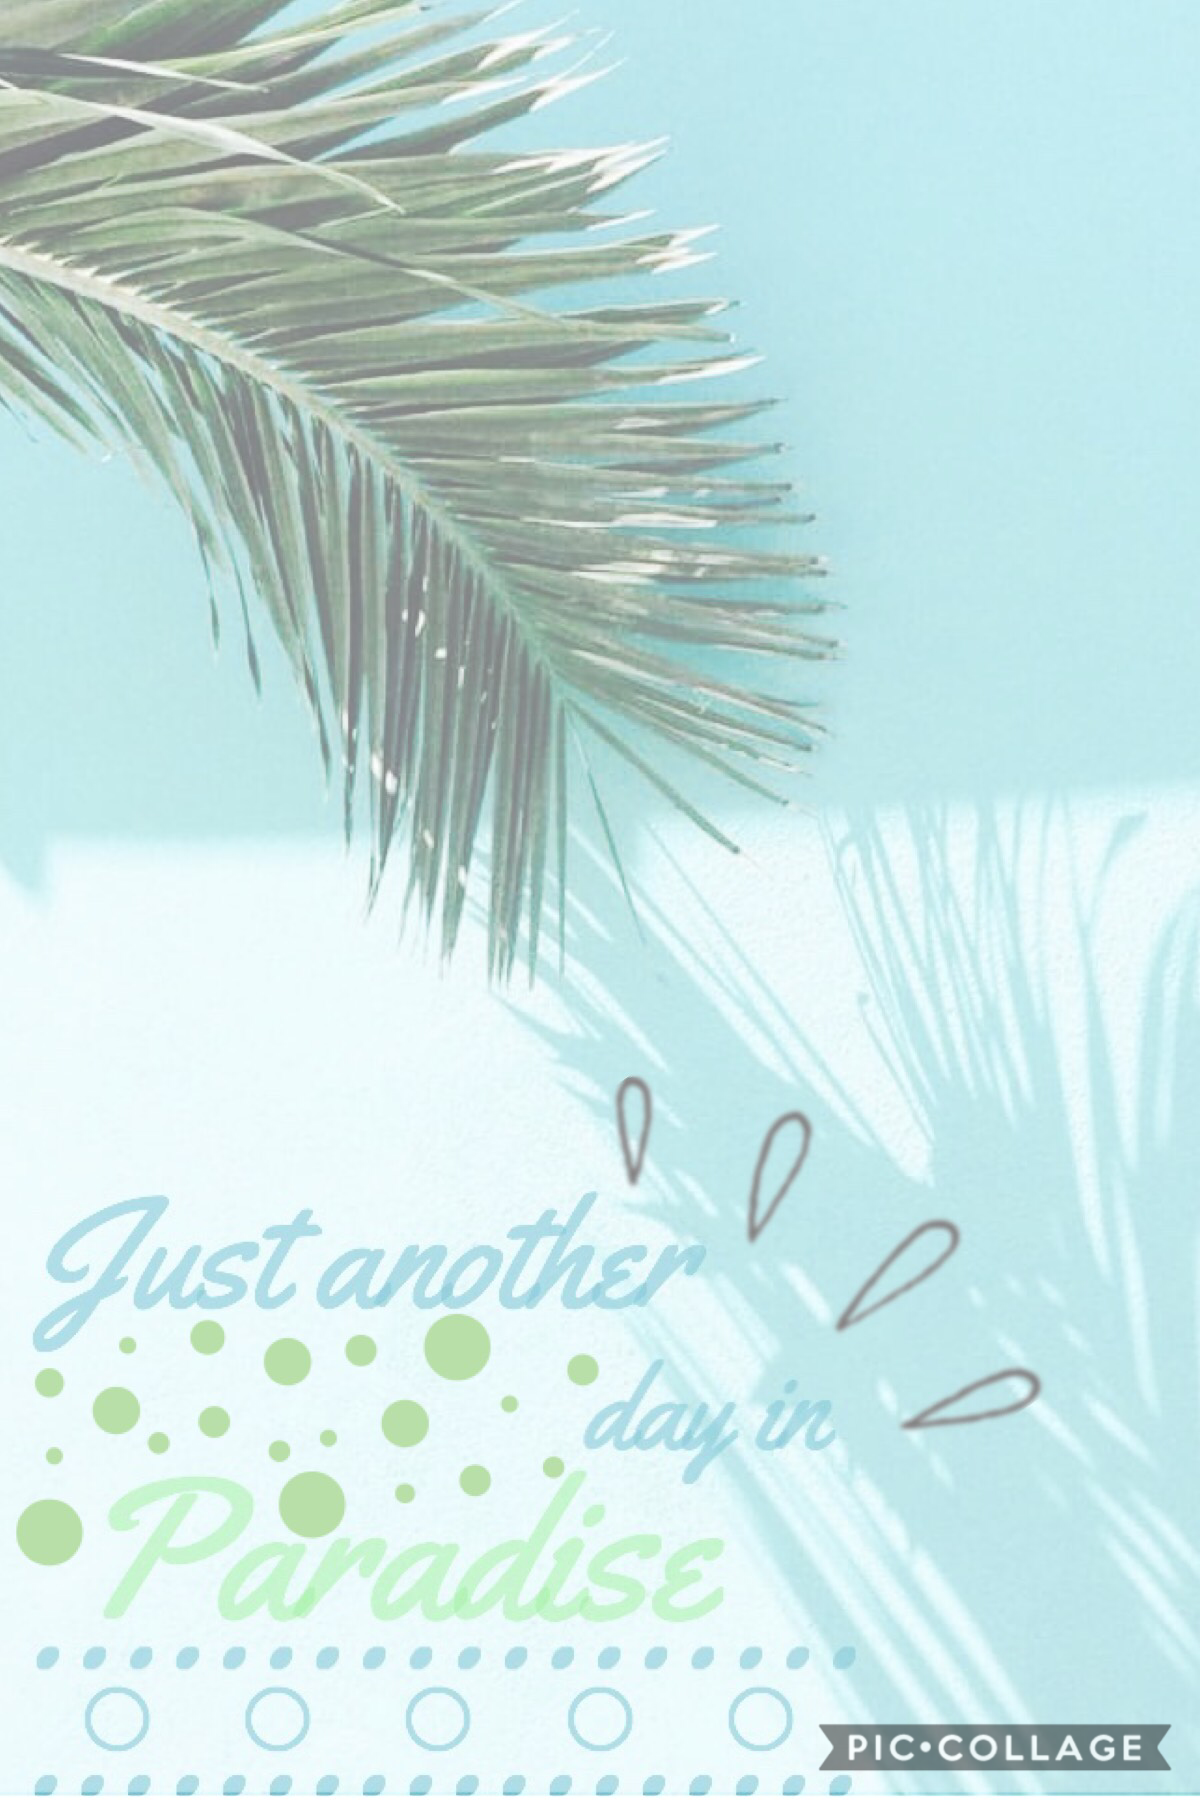 tap!!🌴🌴
Second to last edit for my simple theme. This was from my old acc, I just added onto it. 1-10? QOTD: 🍏 or 🍎? AOTD: 🍎!!